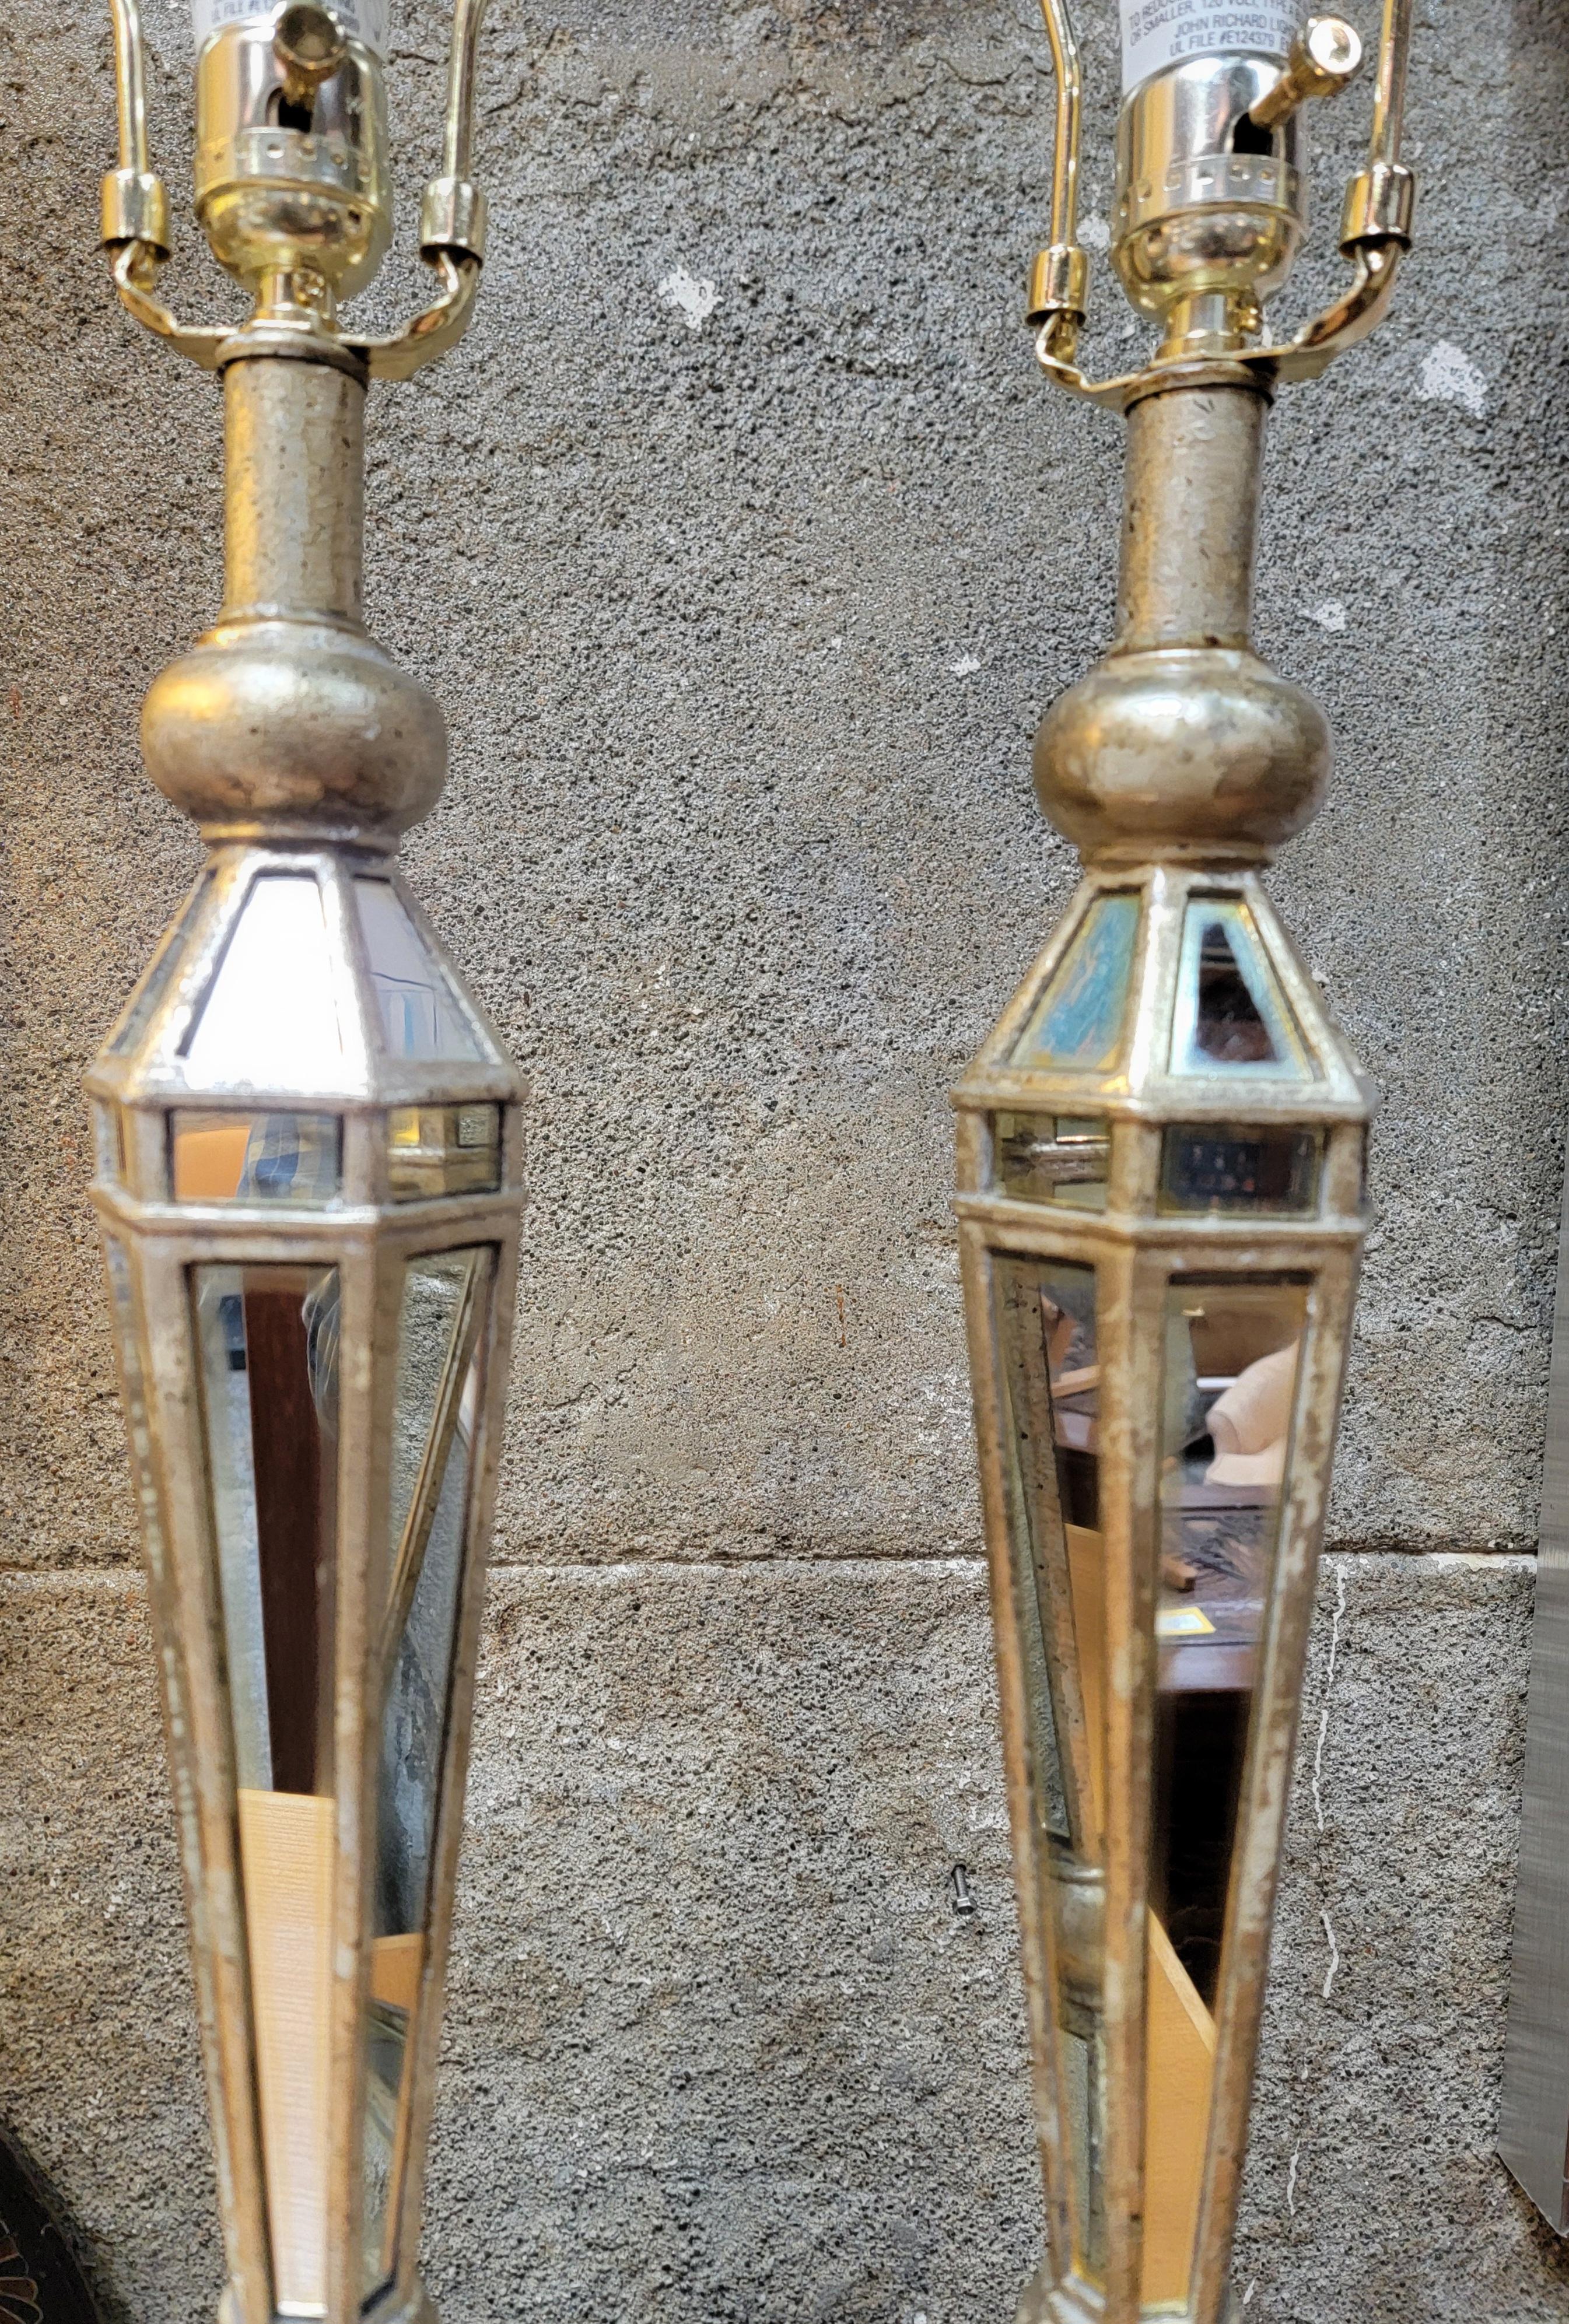 A pair of mirrored table lamps by John-Richard lighting. Retaining paper label and original finials. Excellent original condition. Shades not included. Measure 30.25 inches to top of finial. 